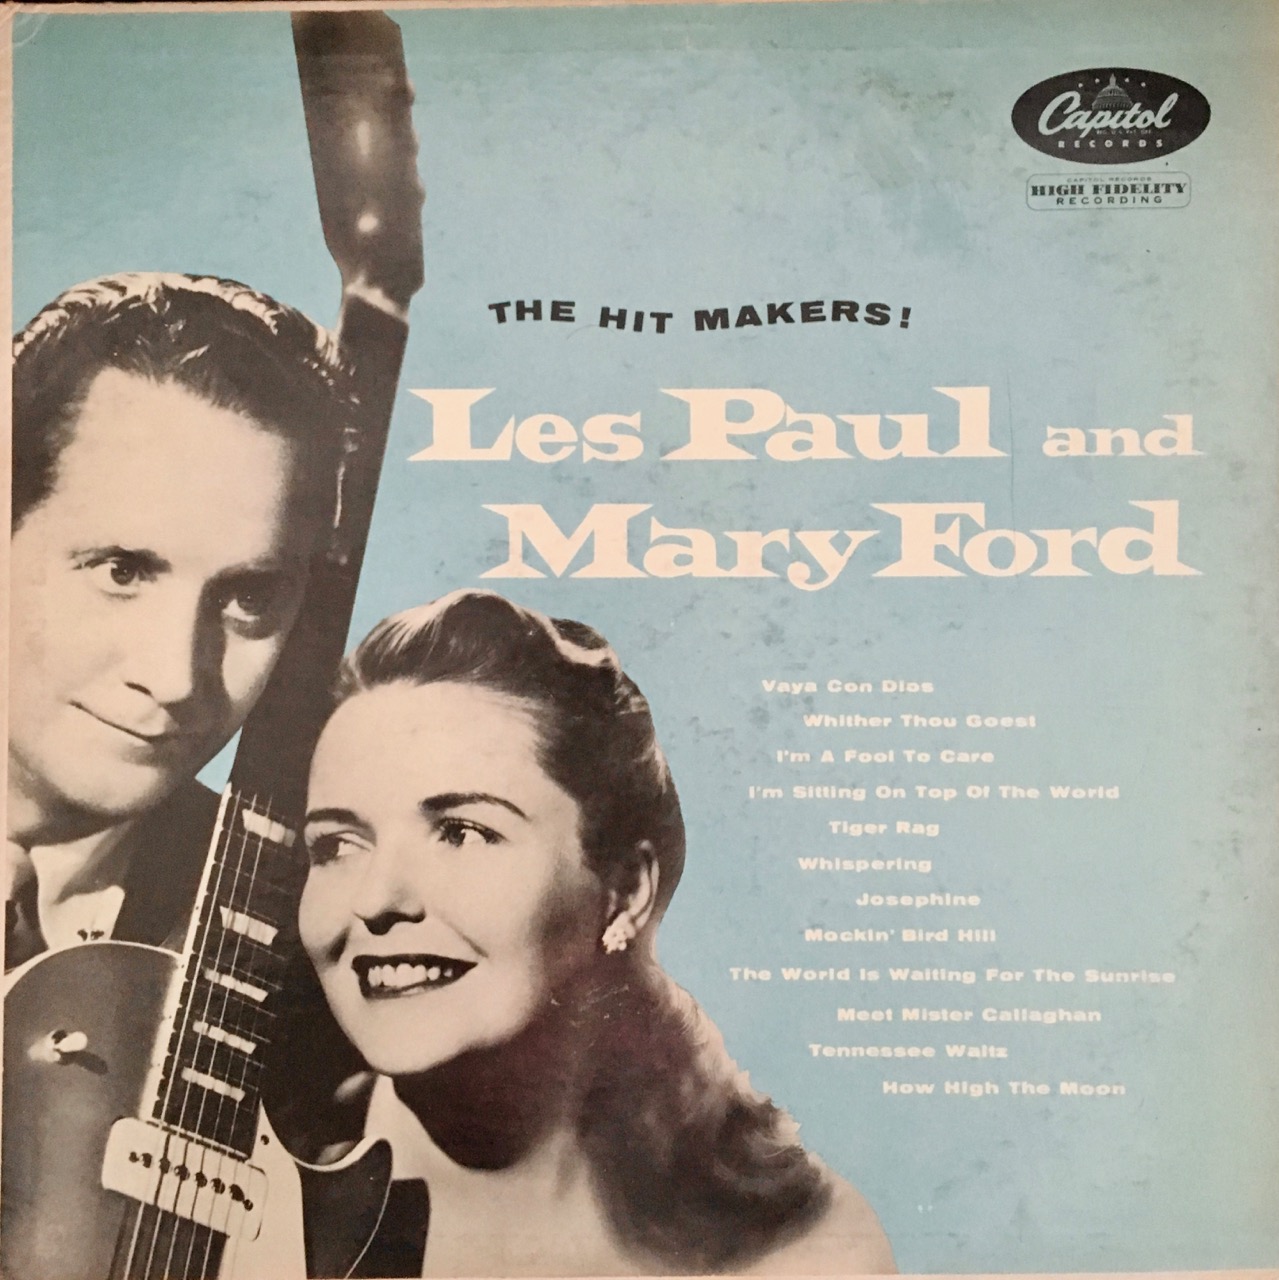 Les Paul and Mary Ford – 'The Hit Makers!' – Album Spotlight – 2